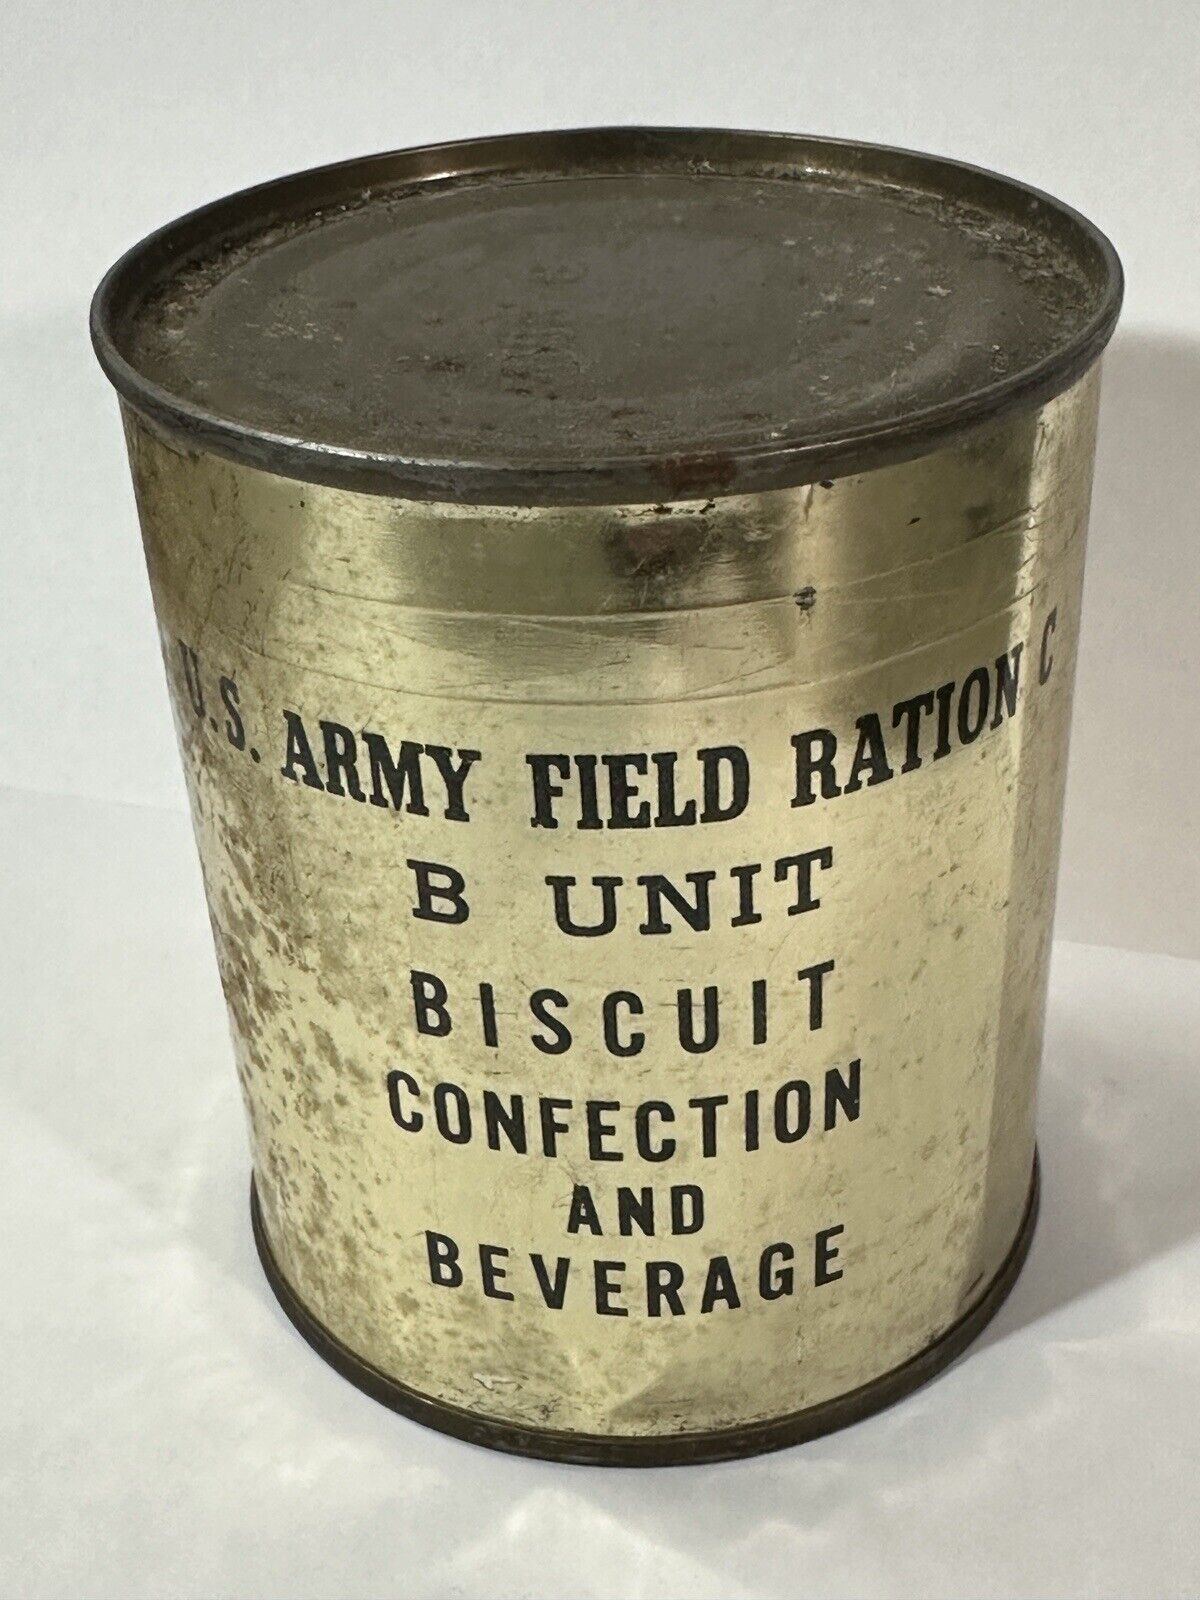 October 1942 WWII US Army Field Ration C Biscuit Confection Beverage B Unit Key